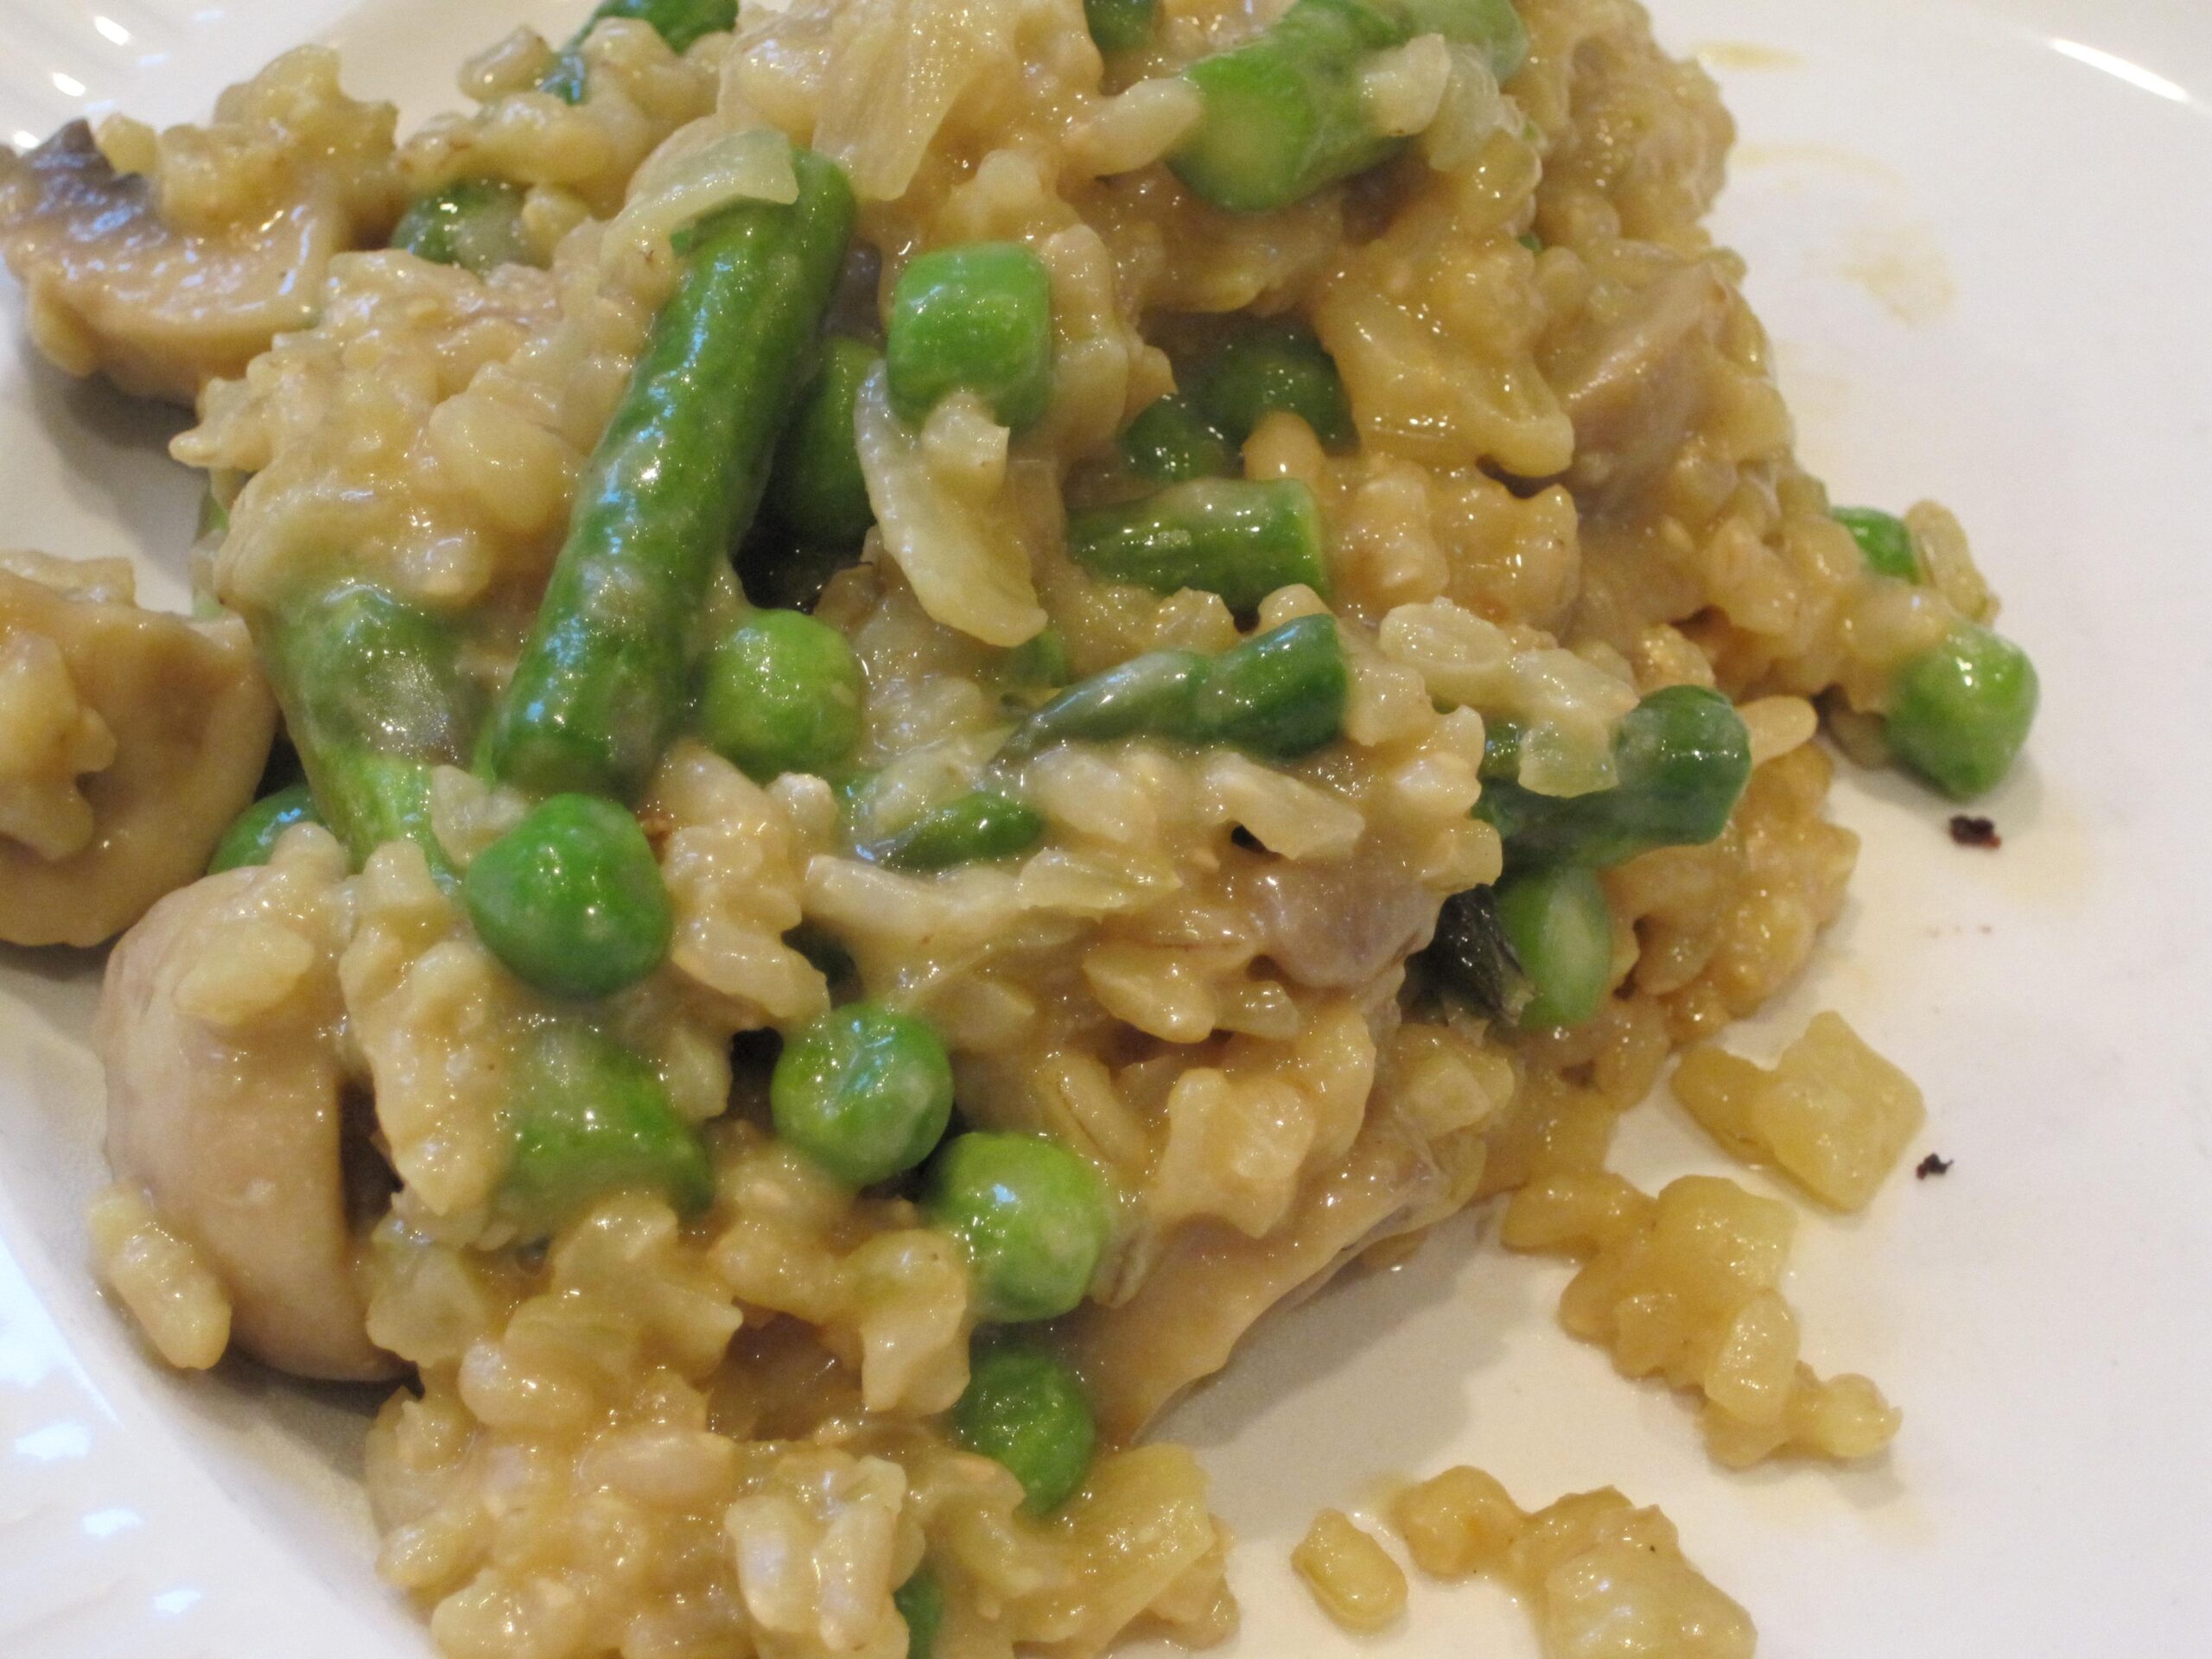  Golden mushroom, pea and asparagus risotto!